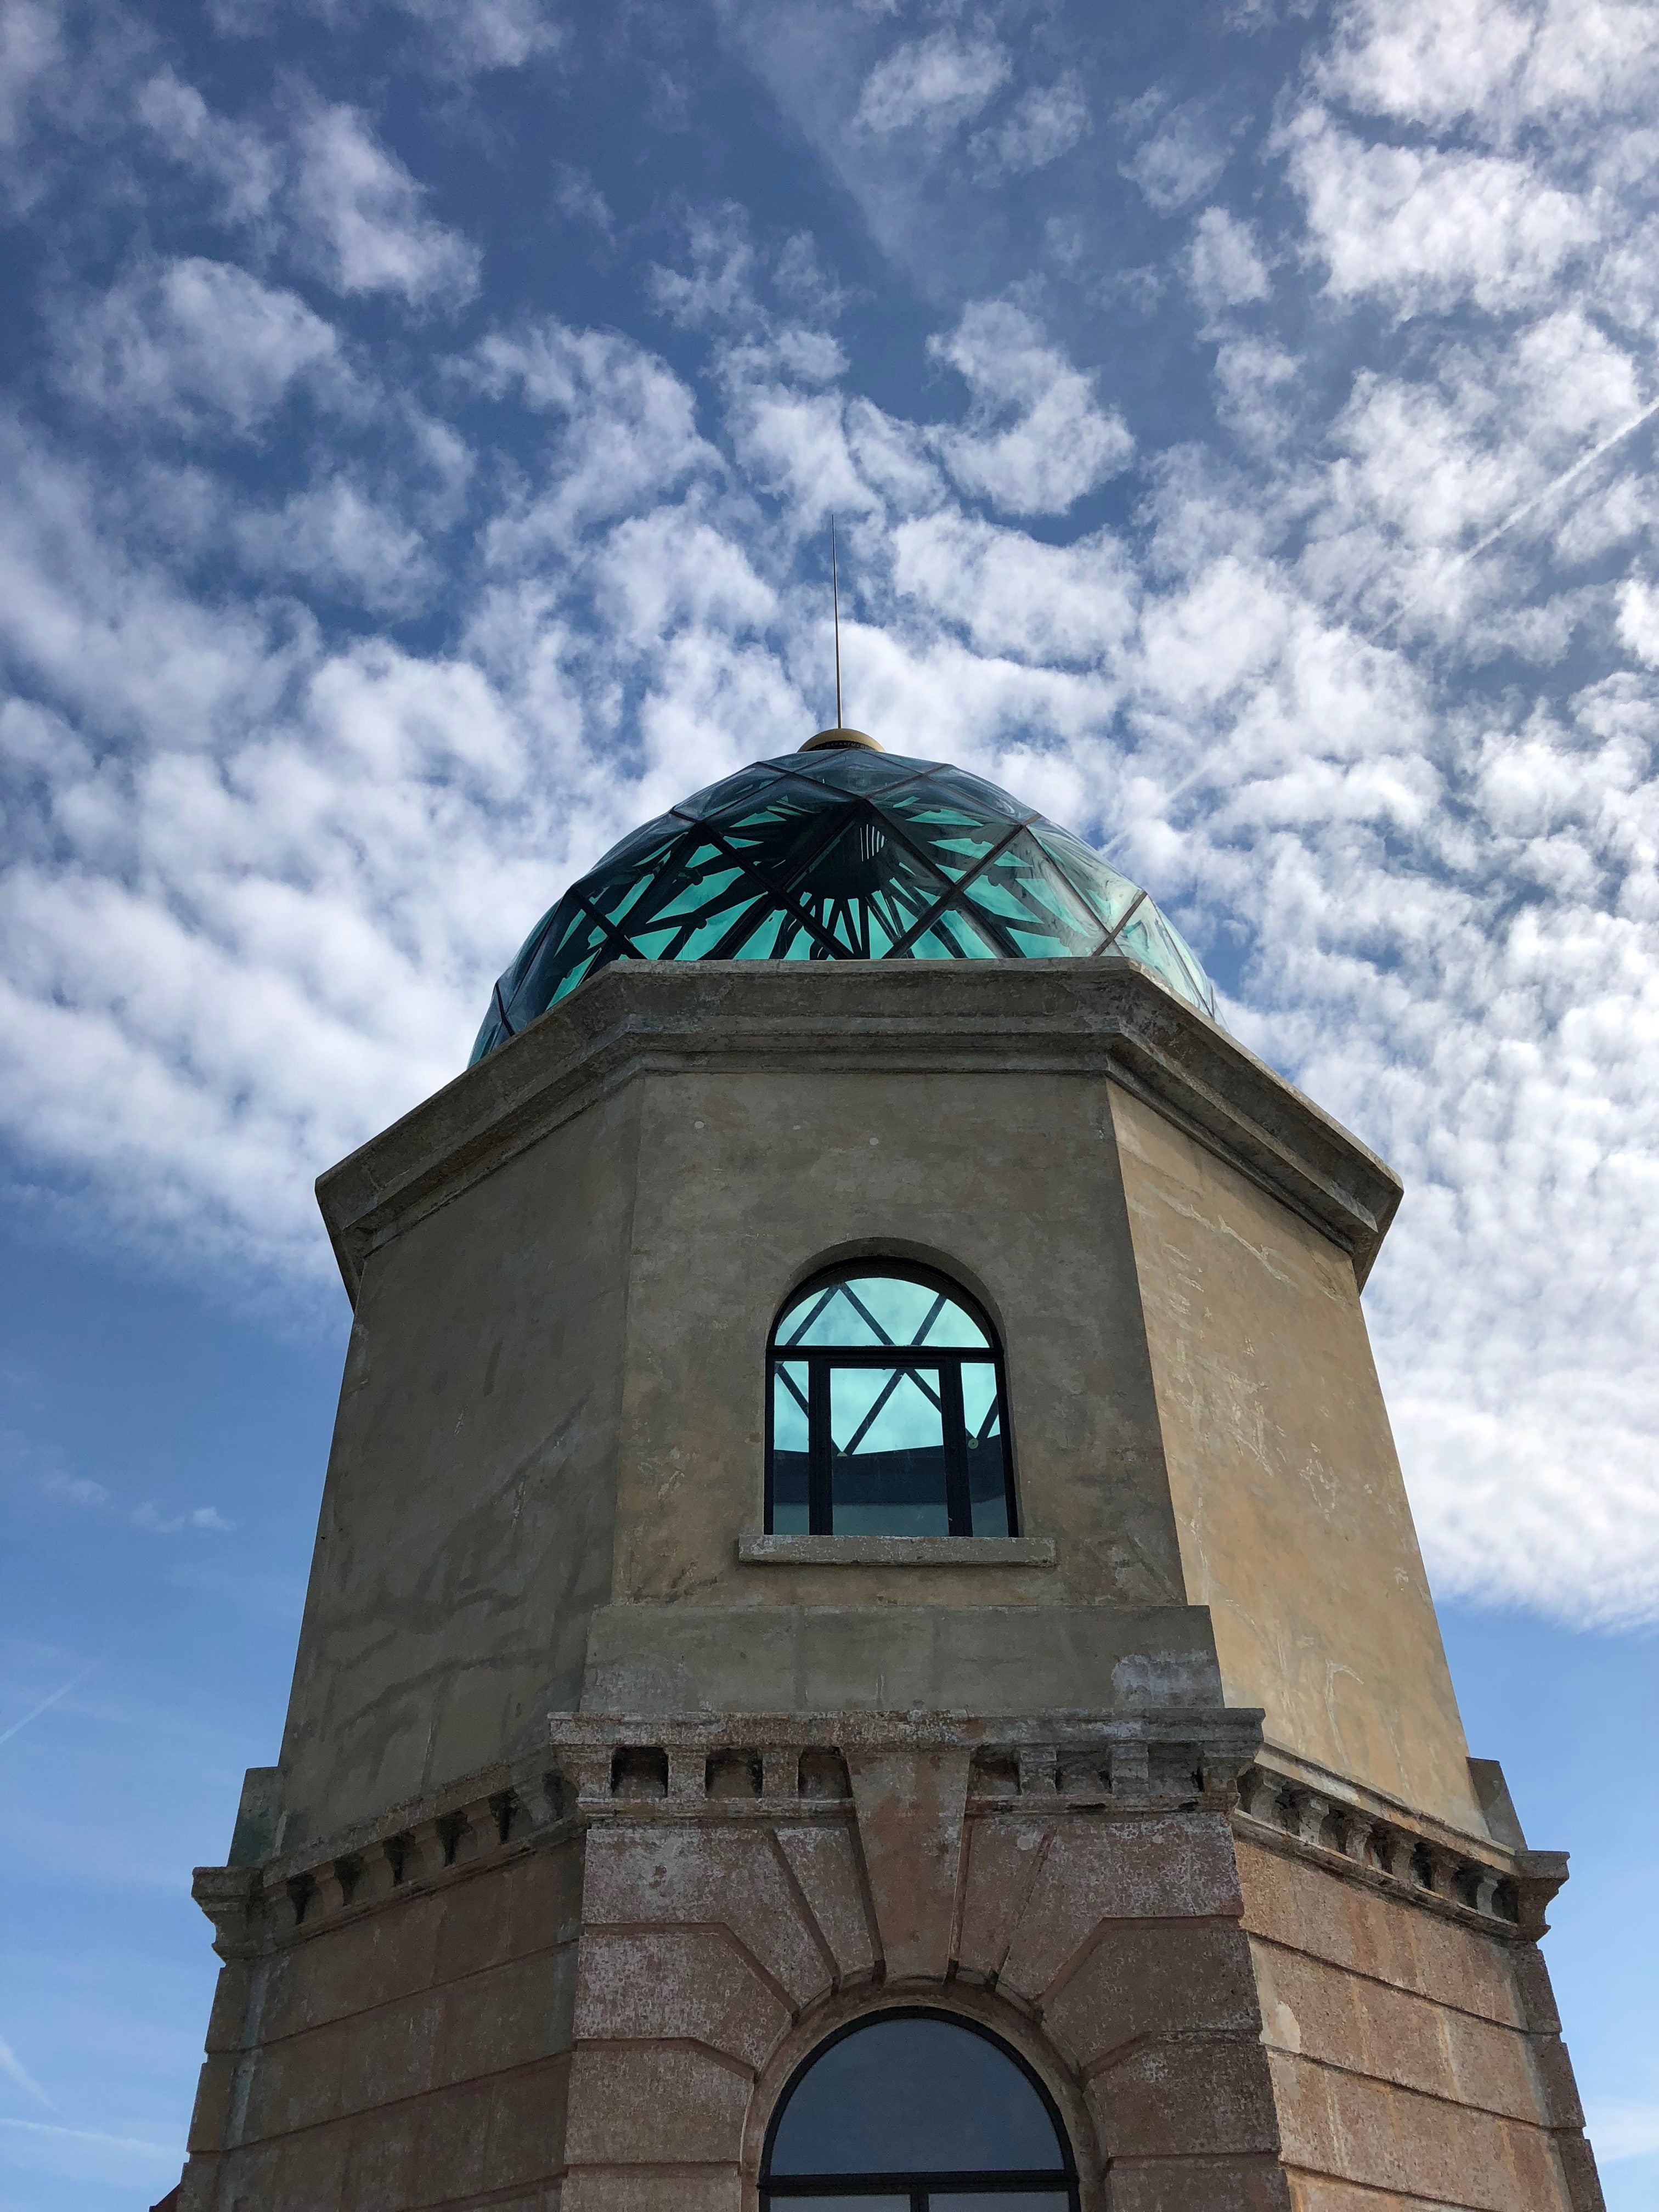 Historic tower with a turquoise dome against a cloudy sky.